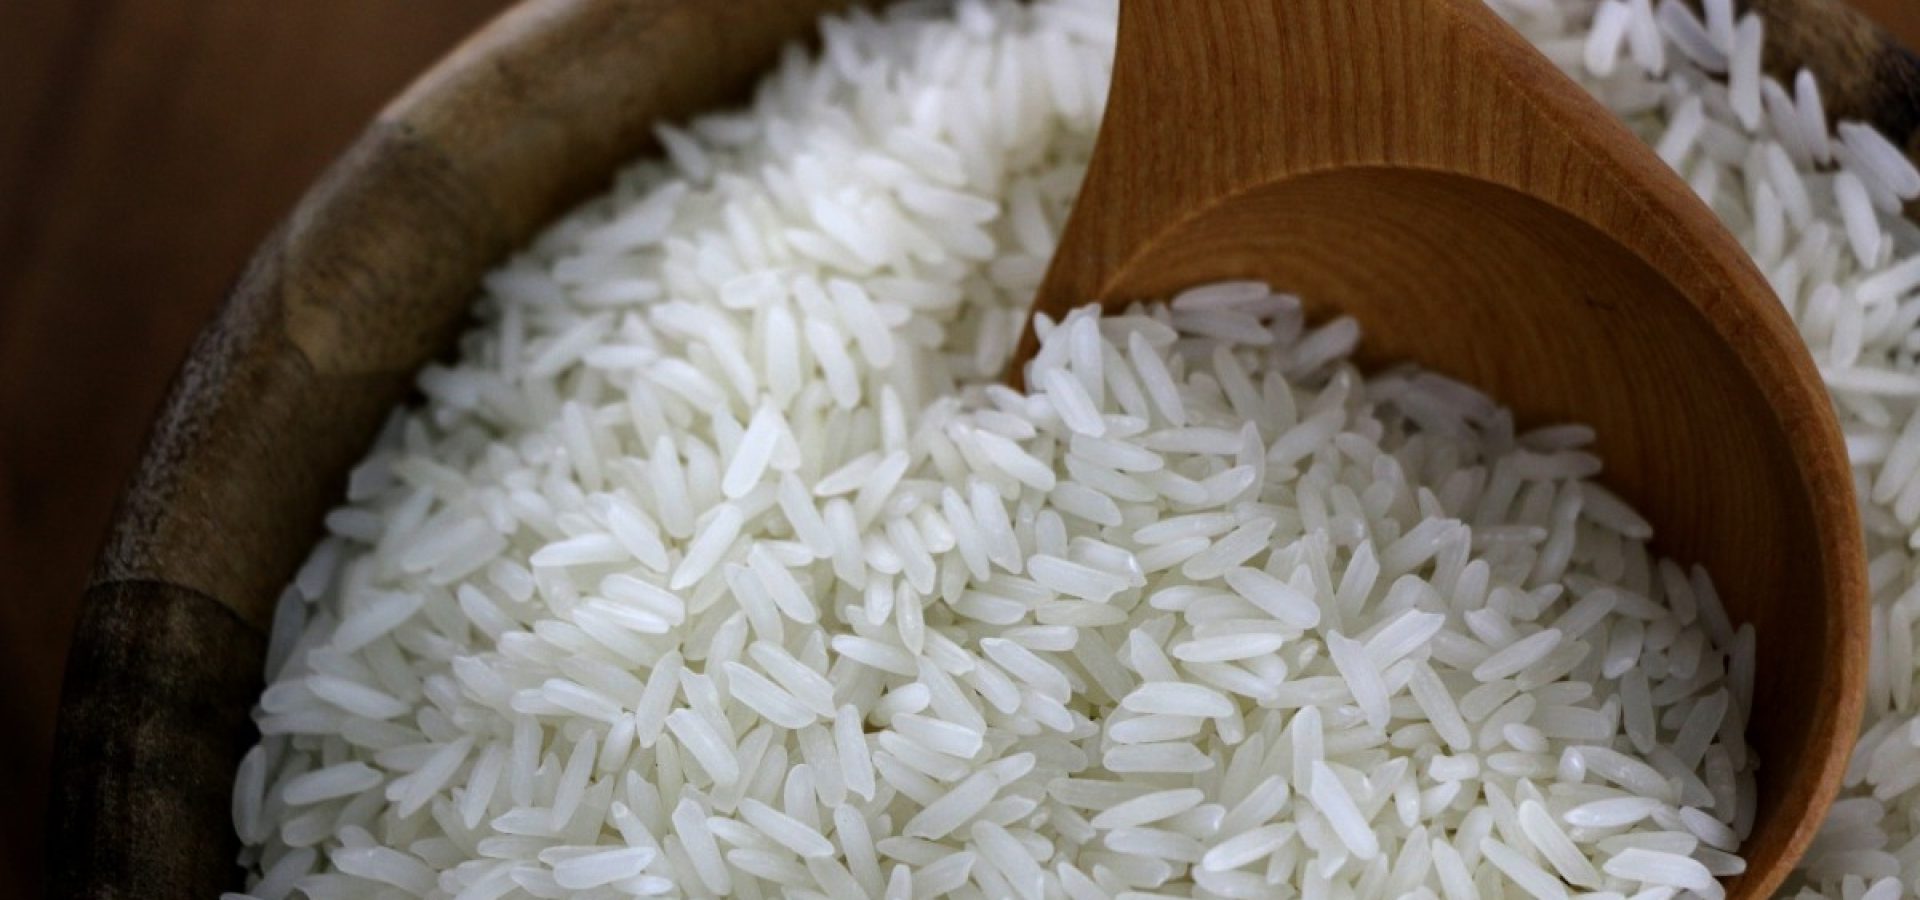 Rice prices rise in Iran due to delay in Customs Clearance process